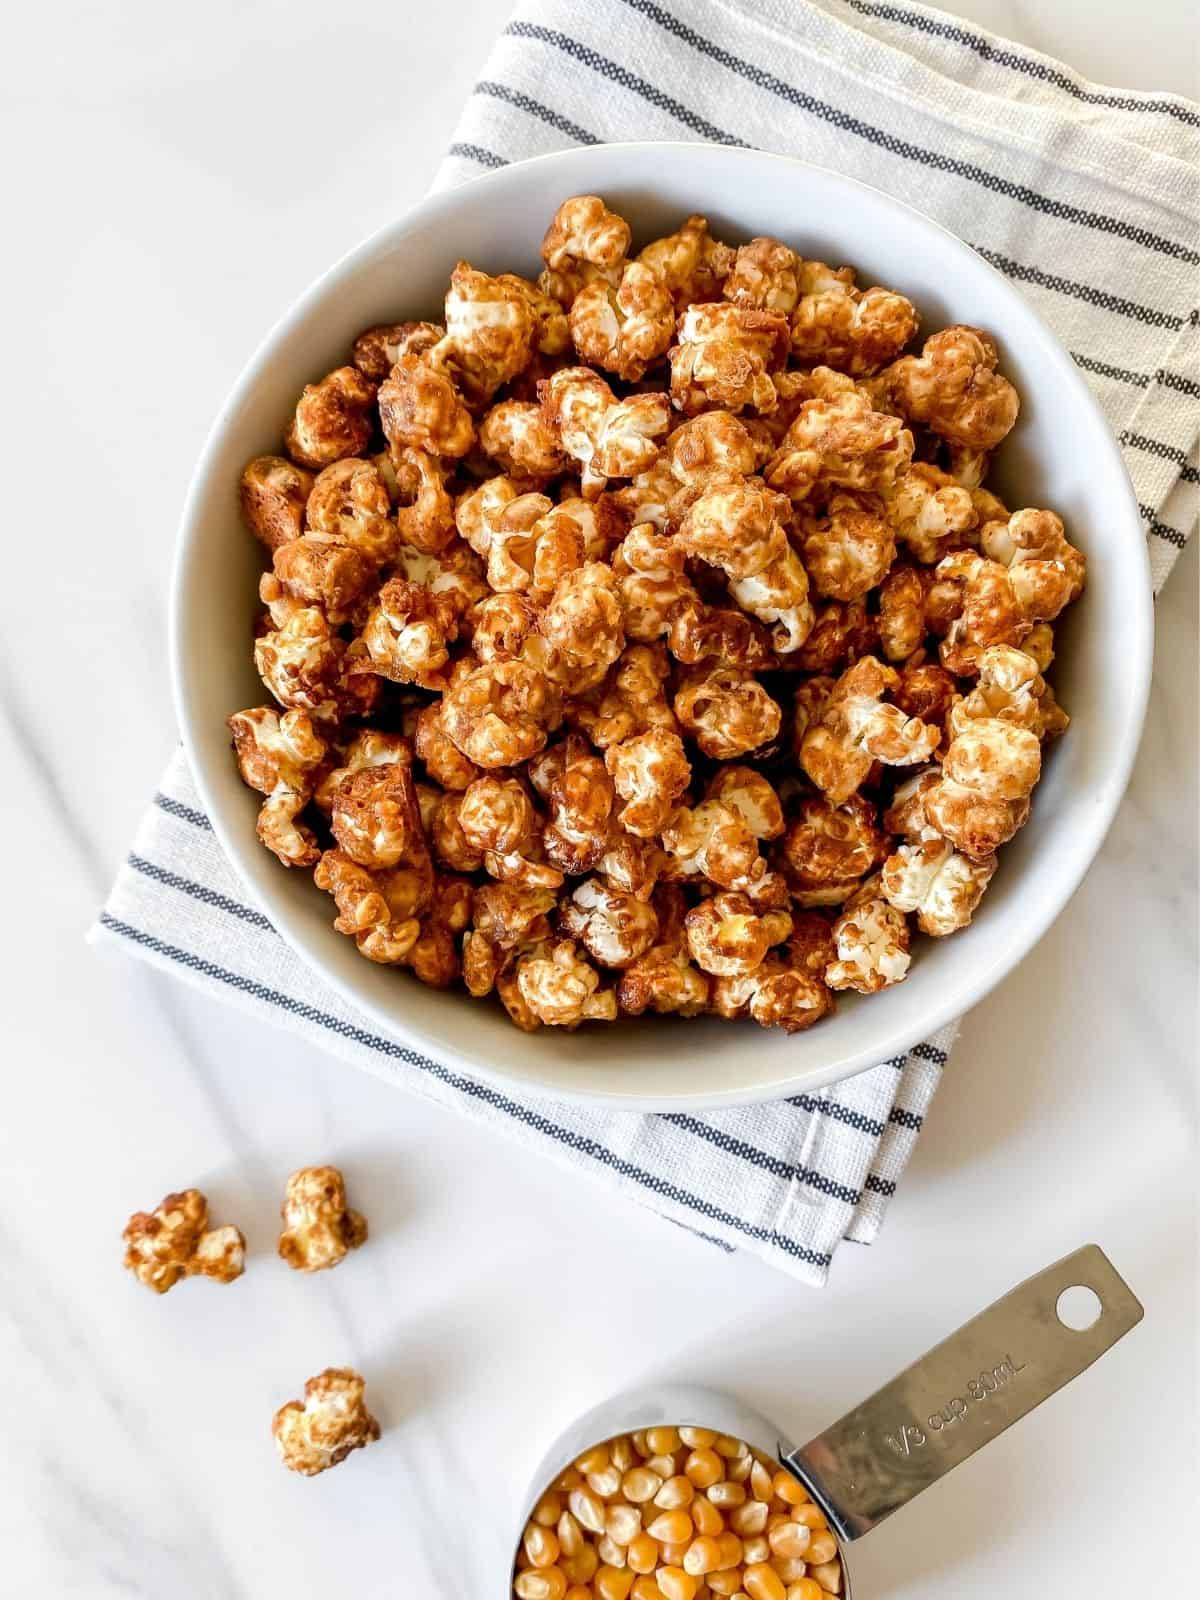 maple syrup popcorn in a white bowl on a striped cloth.